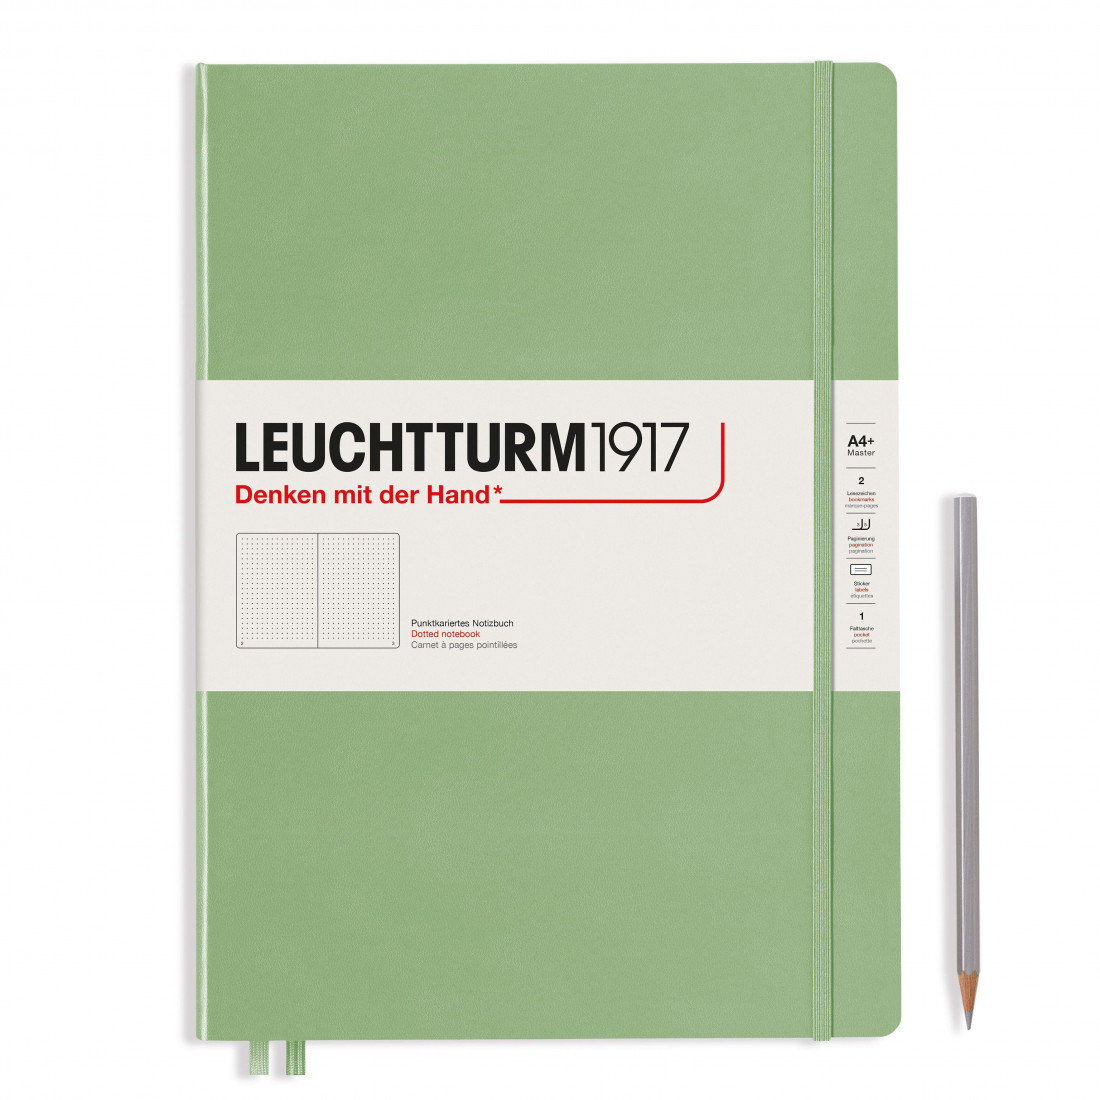 Leuchtturm 1917 Notebook A4 plus Sage Green Dotted  Hard Cover